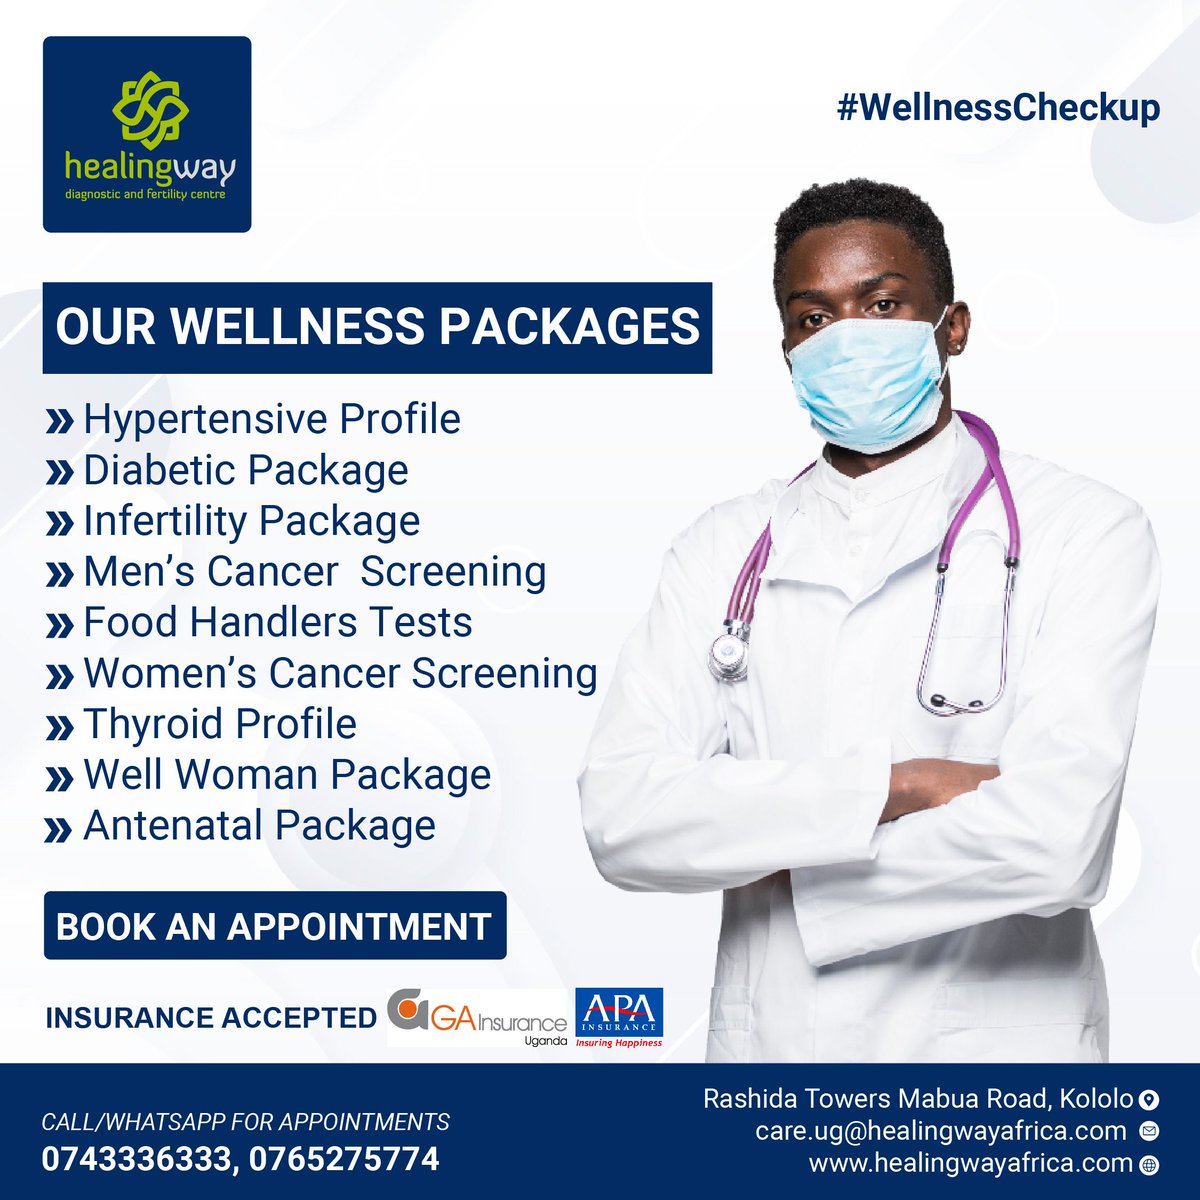 Take charge of your health by being proactive and scheduling a wellness checkup for yourself and your loved ones. Don't wait – book your appointment today! #Wellness #Checkup #Healingway #Kololo